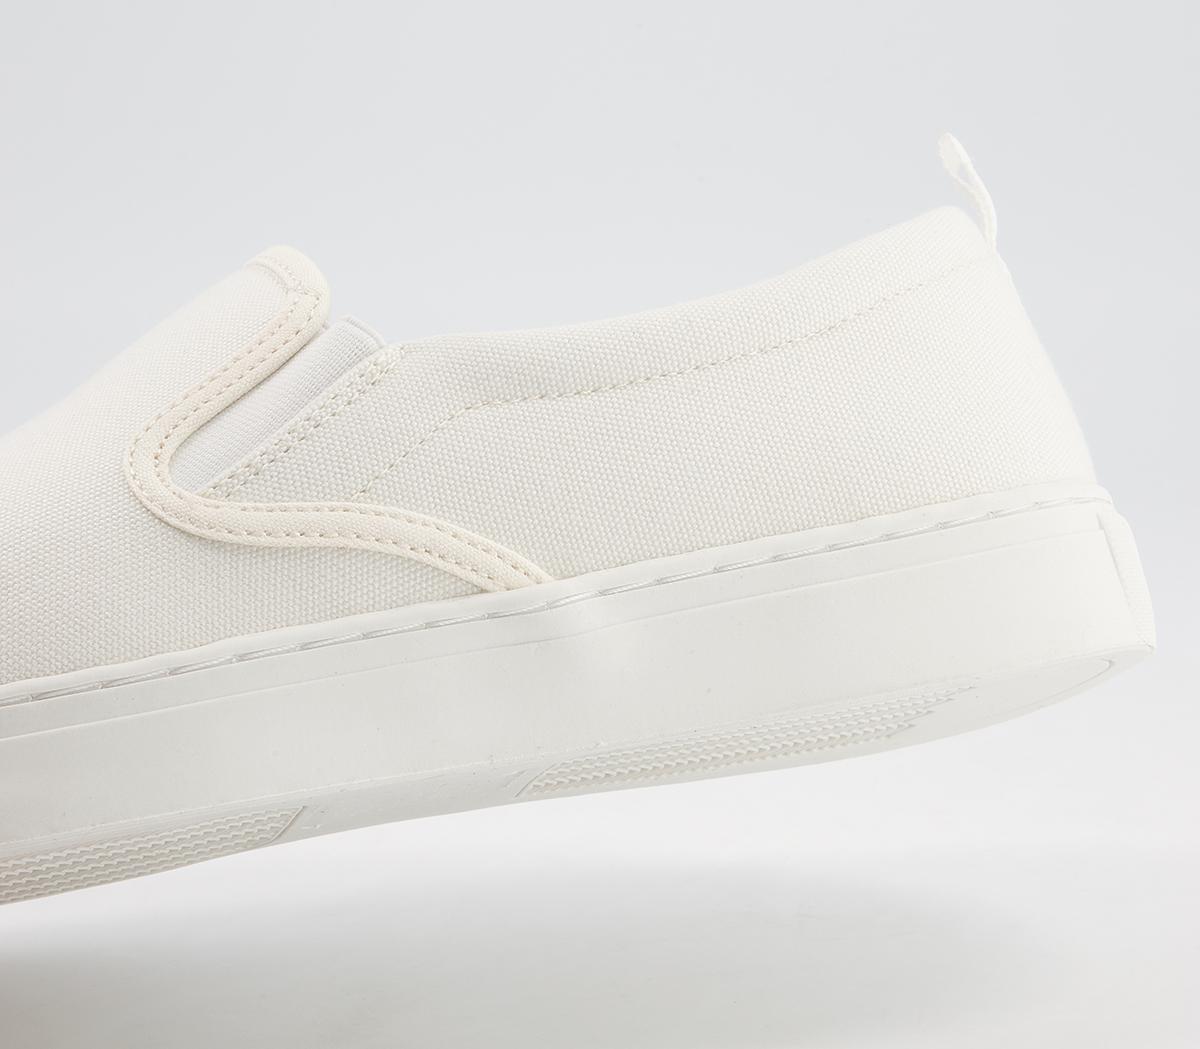 OFFICE Cane Canvas Trainers Off White Canvas - Men's Casual Shoes